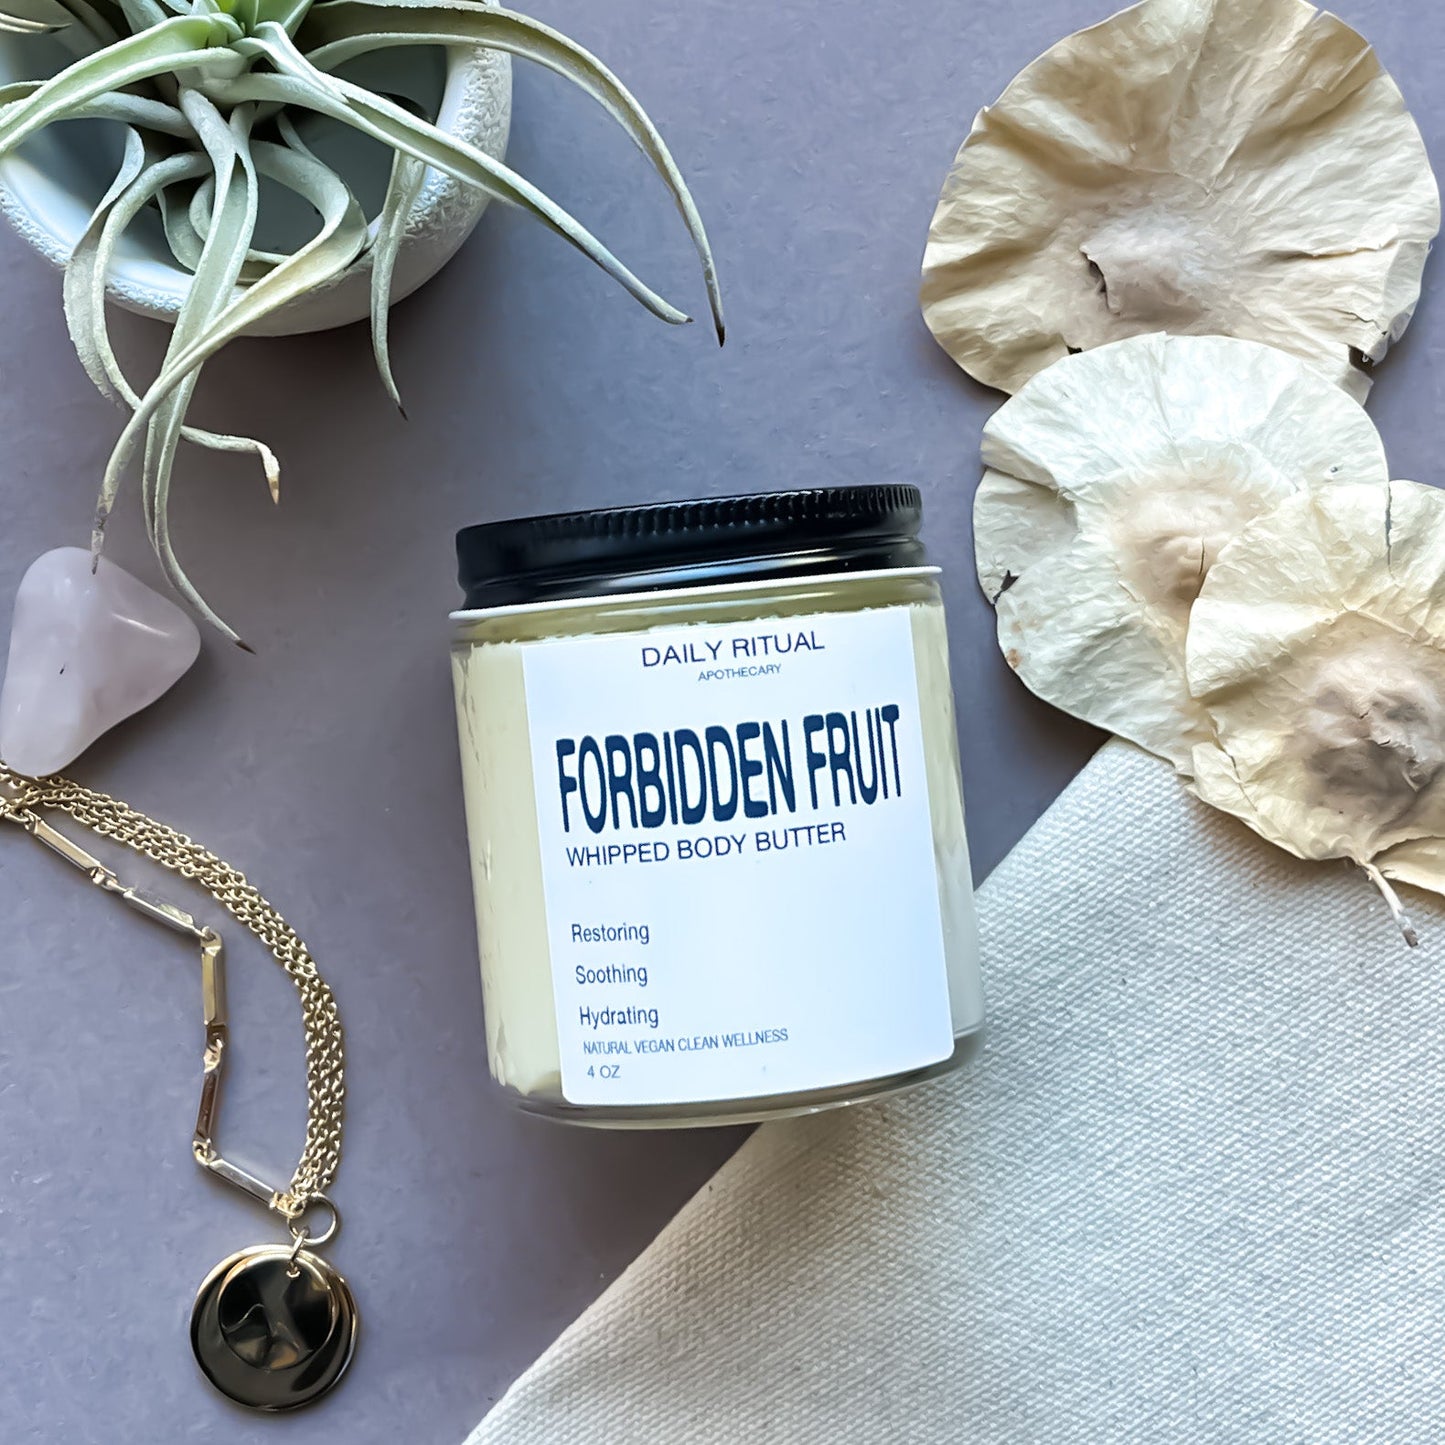 Forbidden Fruit Whipped Body Butter - Daily Ritual Apothecary